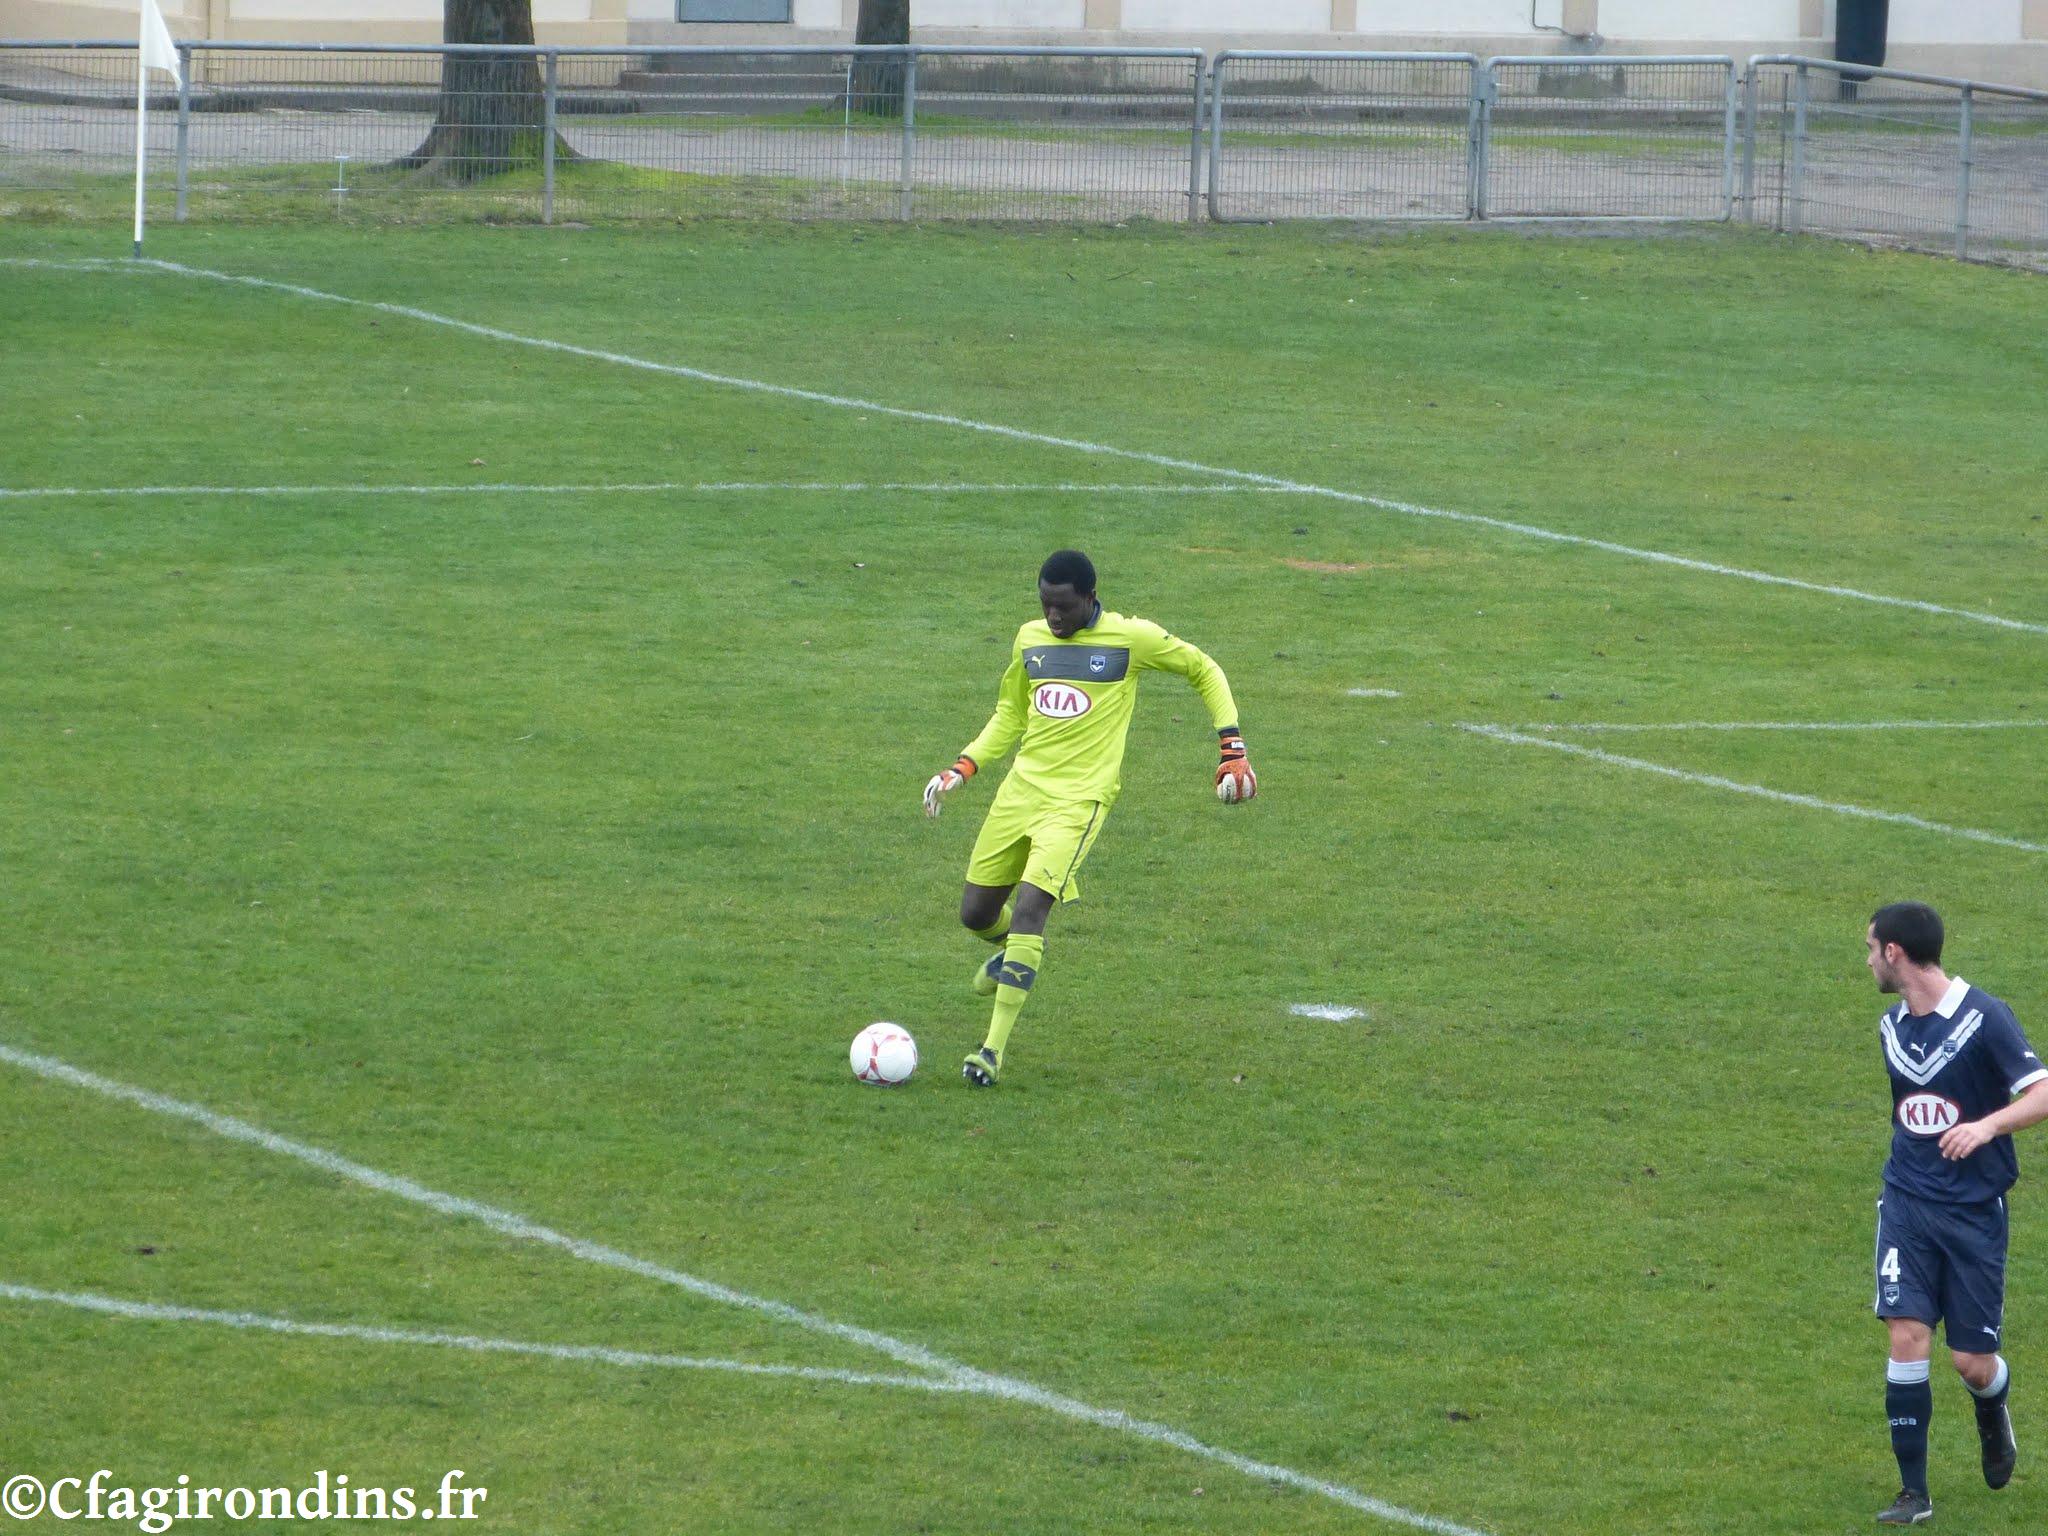 Cfa Girondins : Victoire 4-0 face à Viry ! - Formation Girondins 